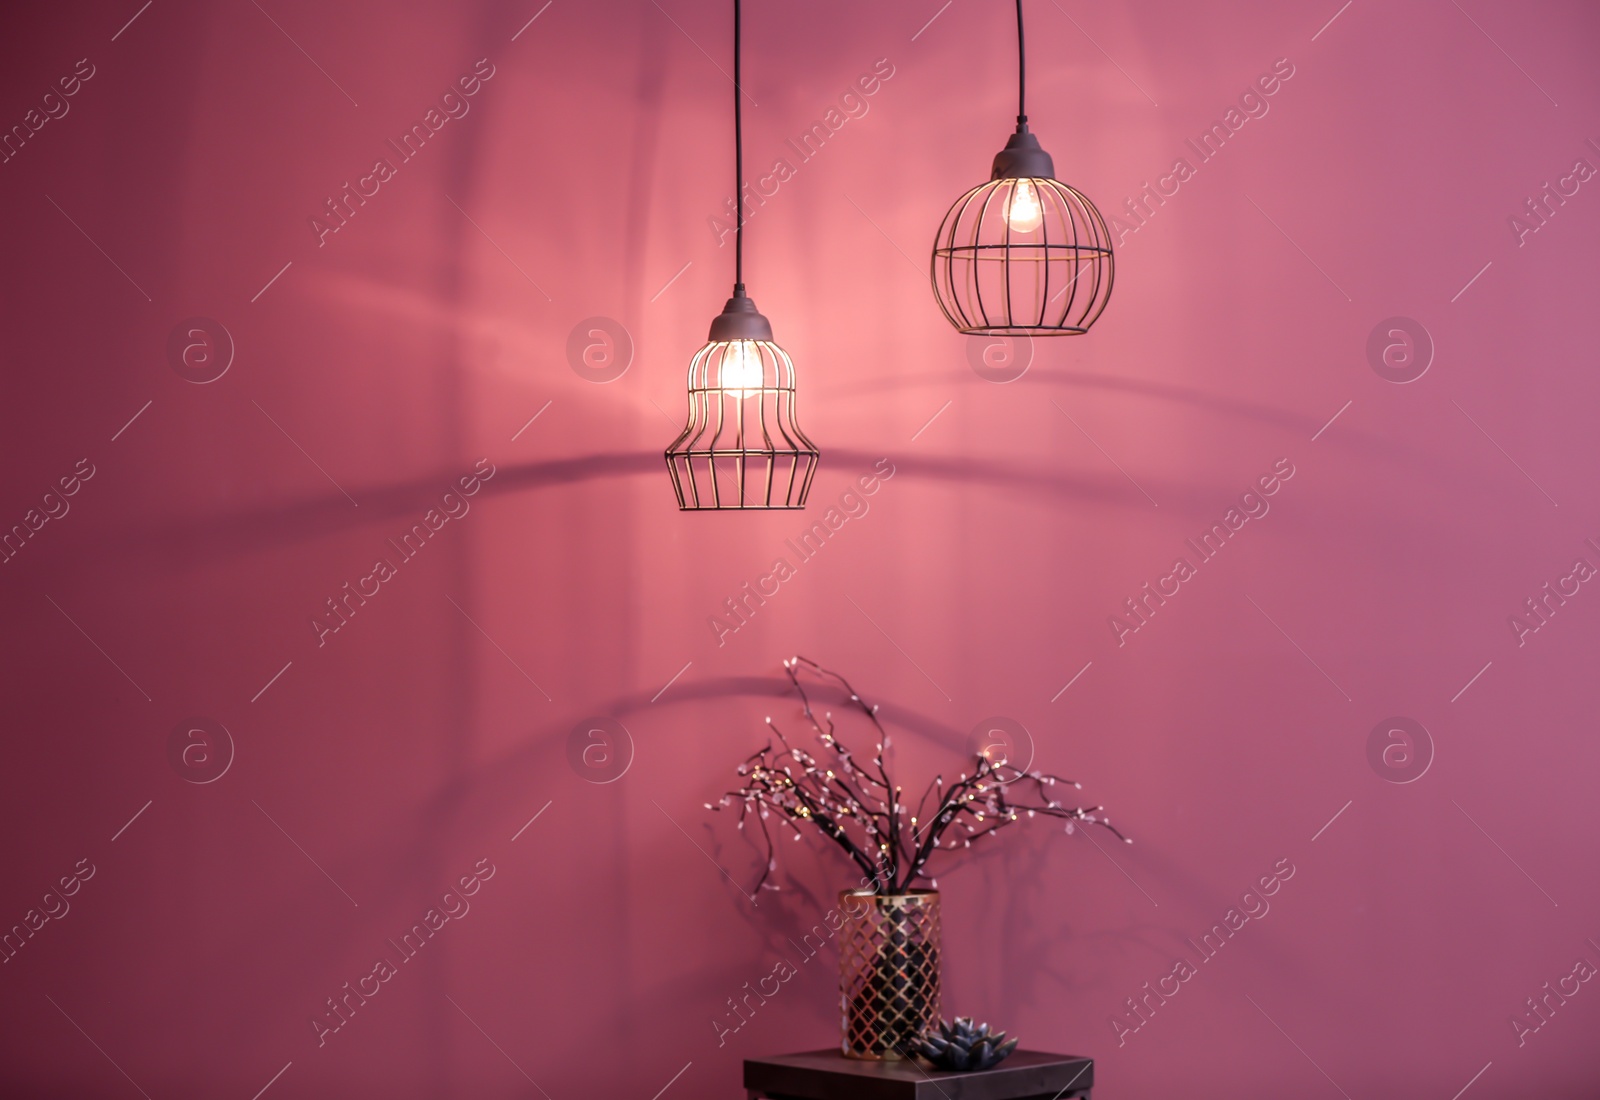 Photo of Room interior with elegant lamps and small table